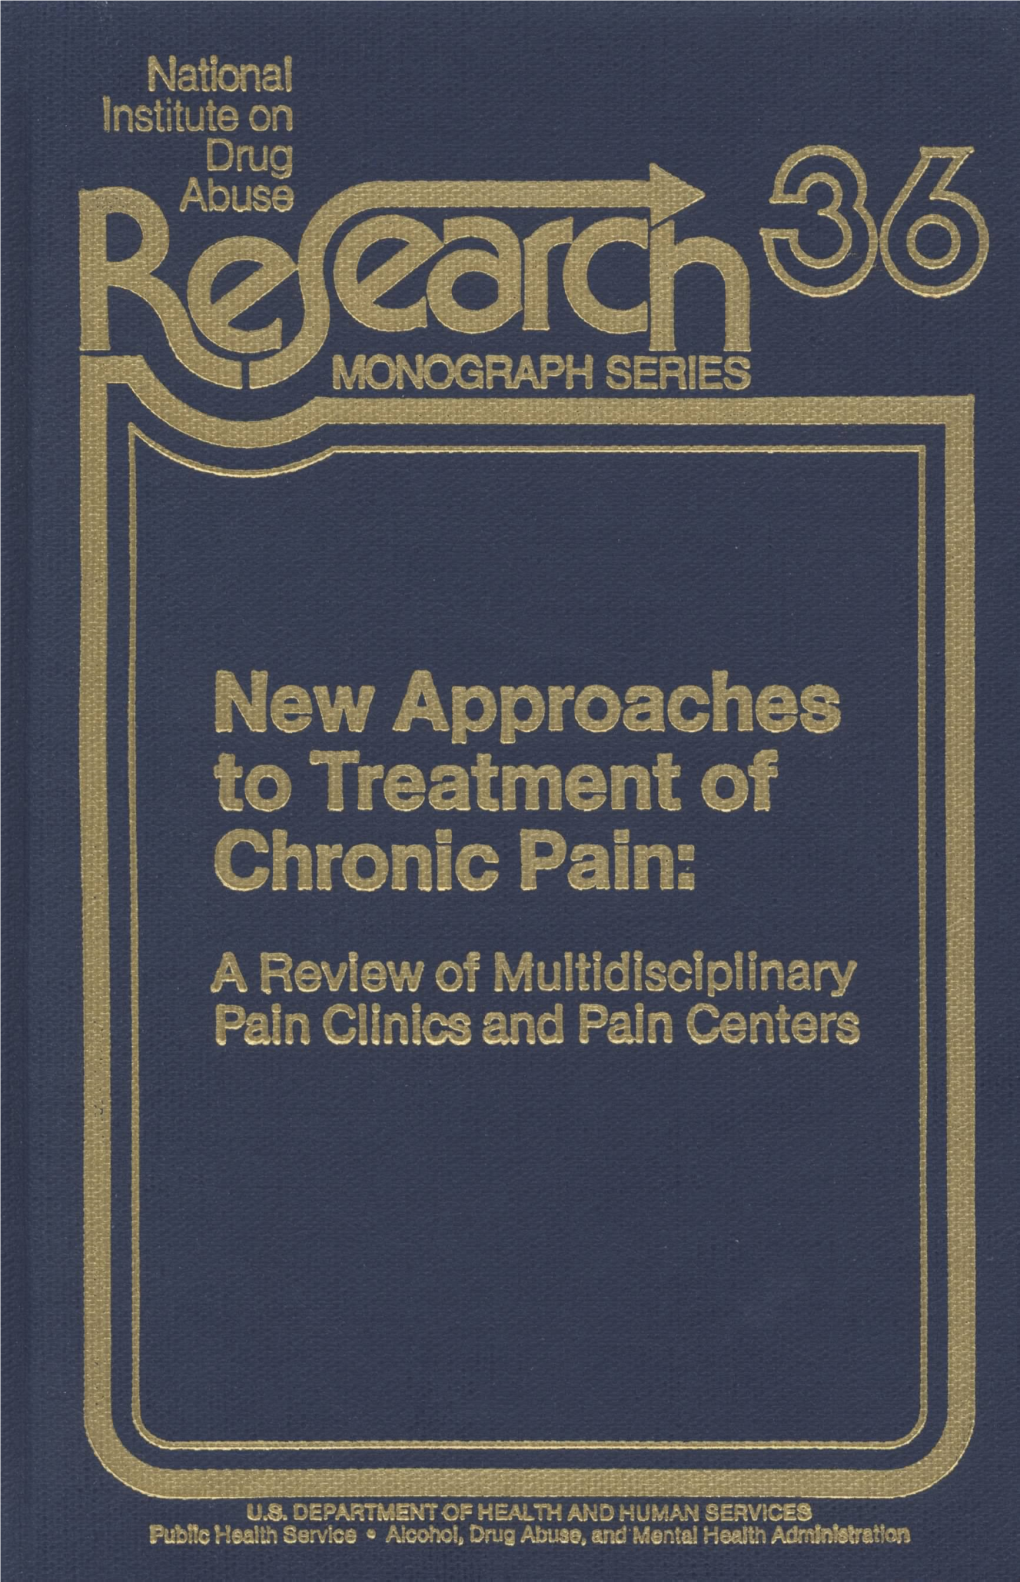 New Approaches to Treatment of Chronic Pain: a Review of Multidisciplinary Pain Clinics and Pain Centers